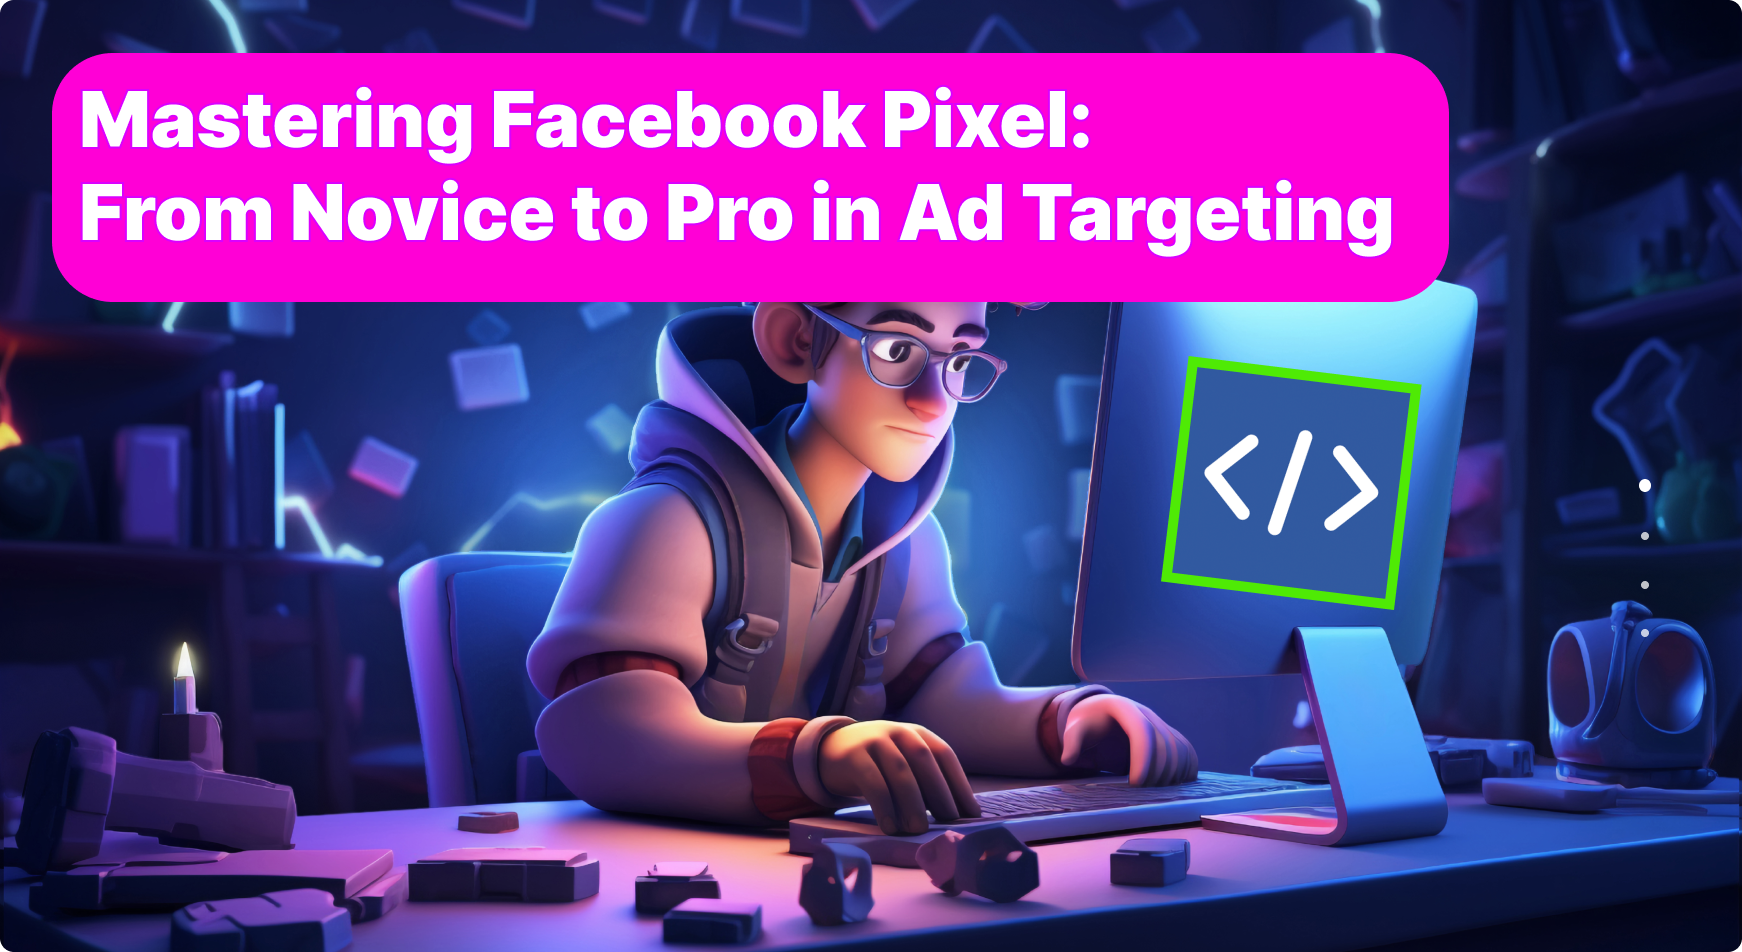 Mastering Facebook Pixel: From Novice to Pro in Ad Targeting